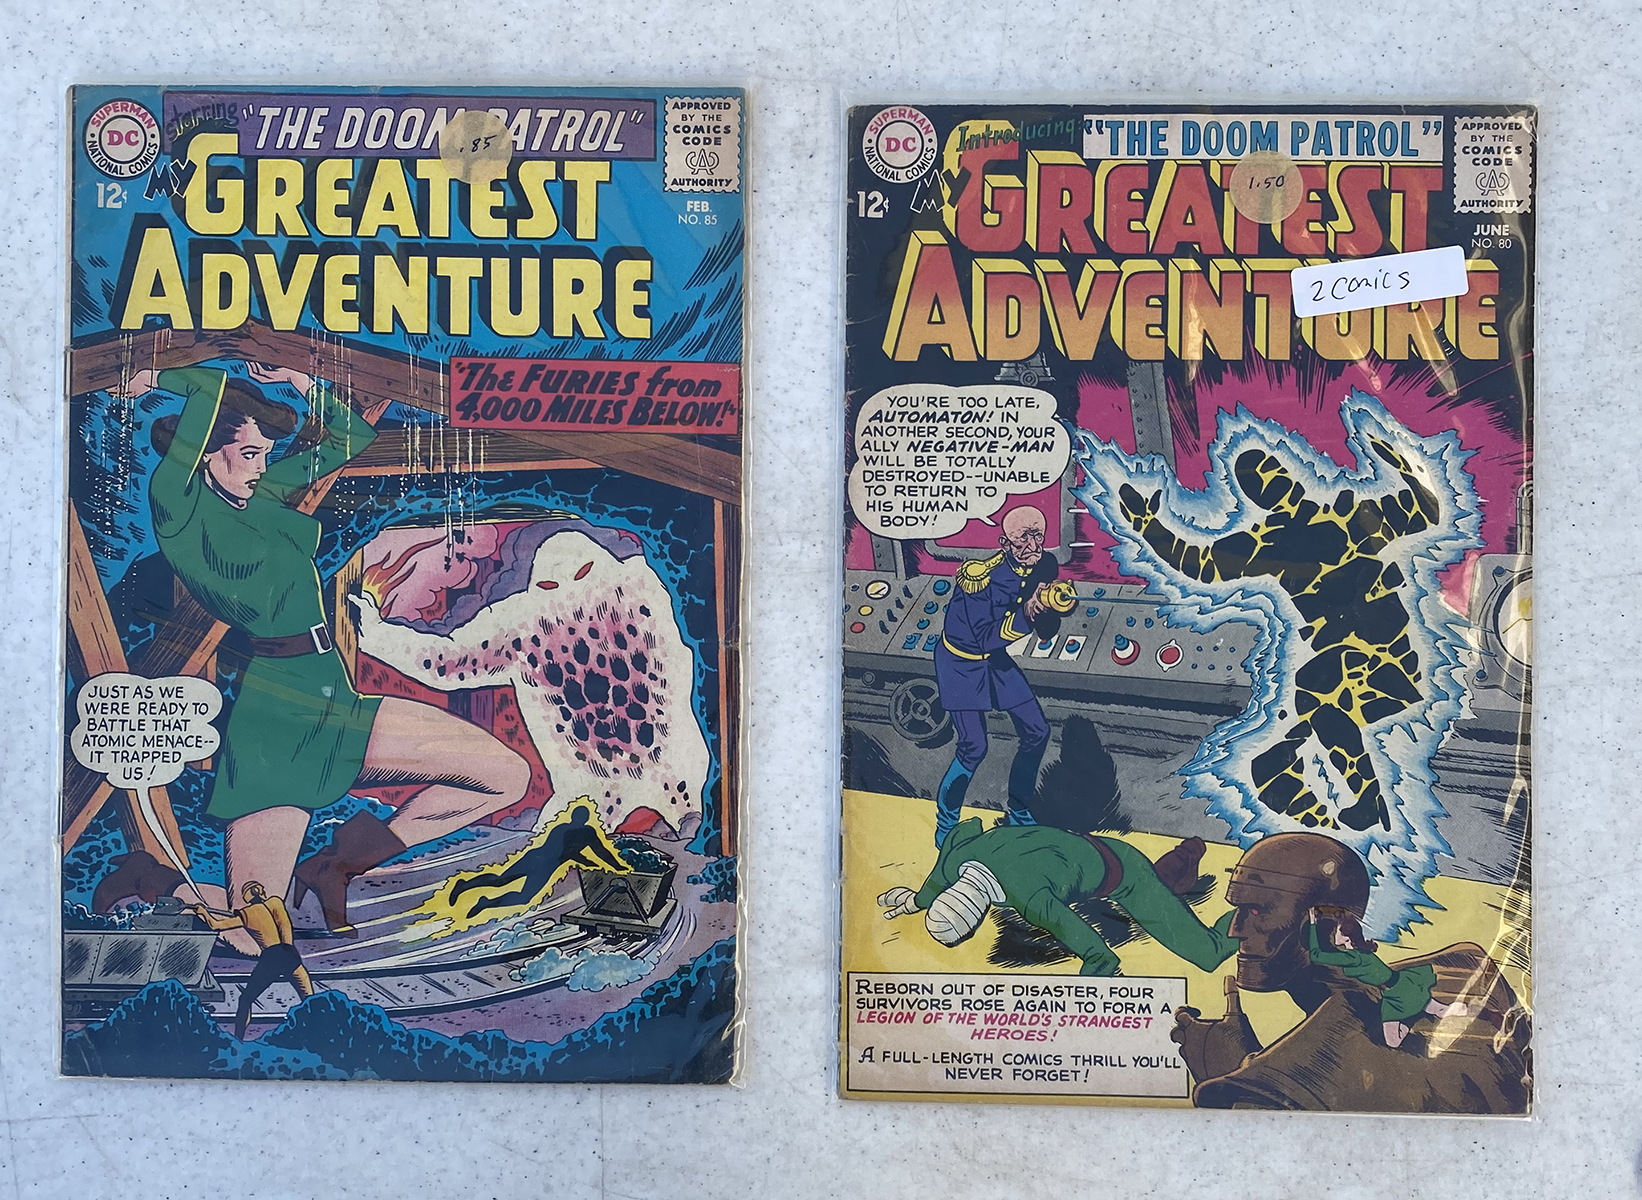 SILVER AGE MY GREATEST ADVENTURE 273a2c